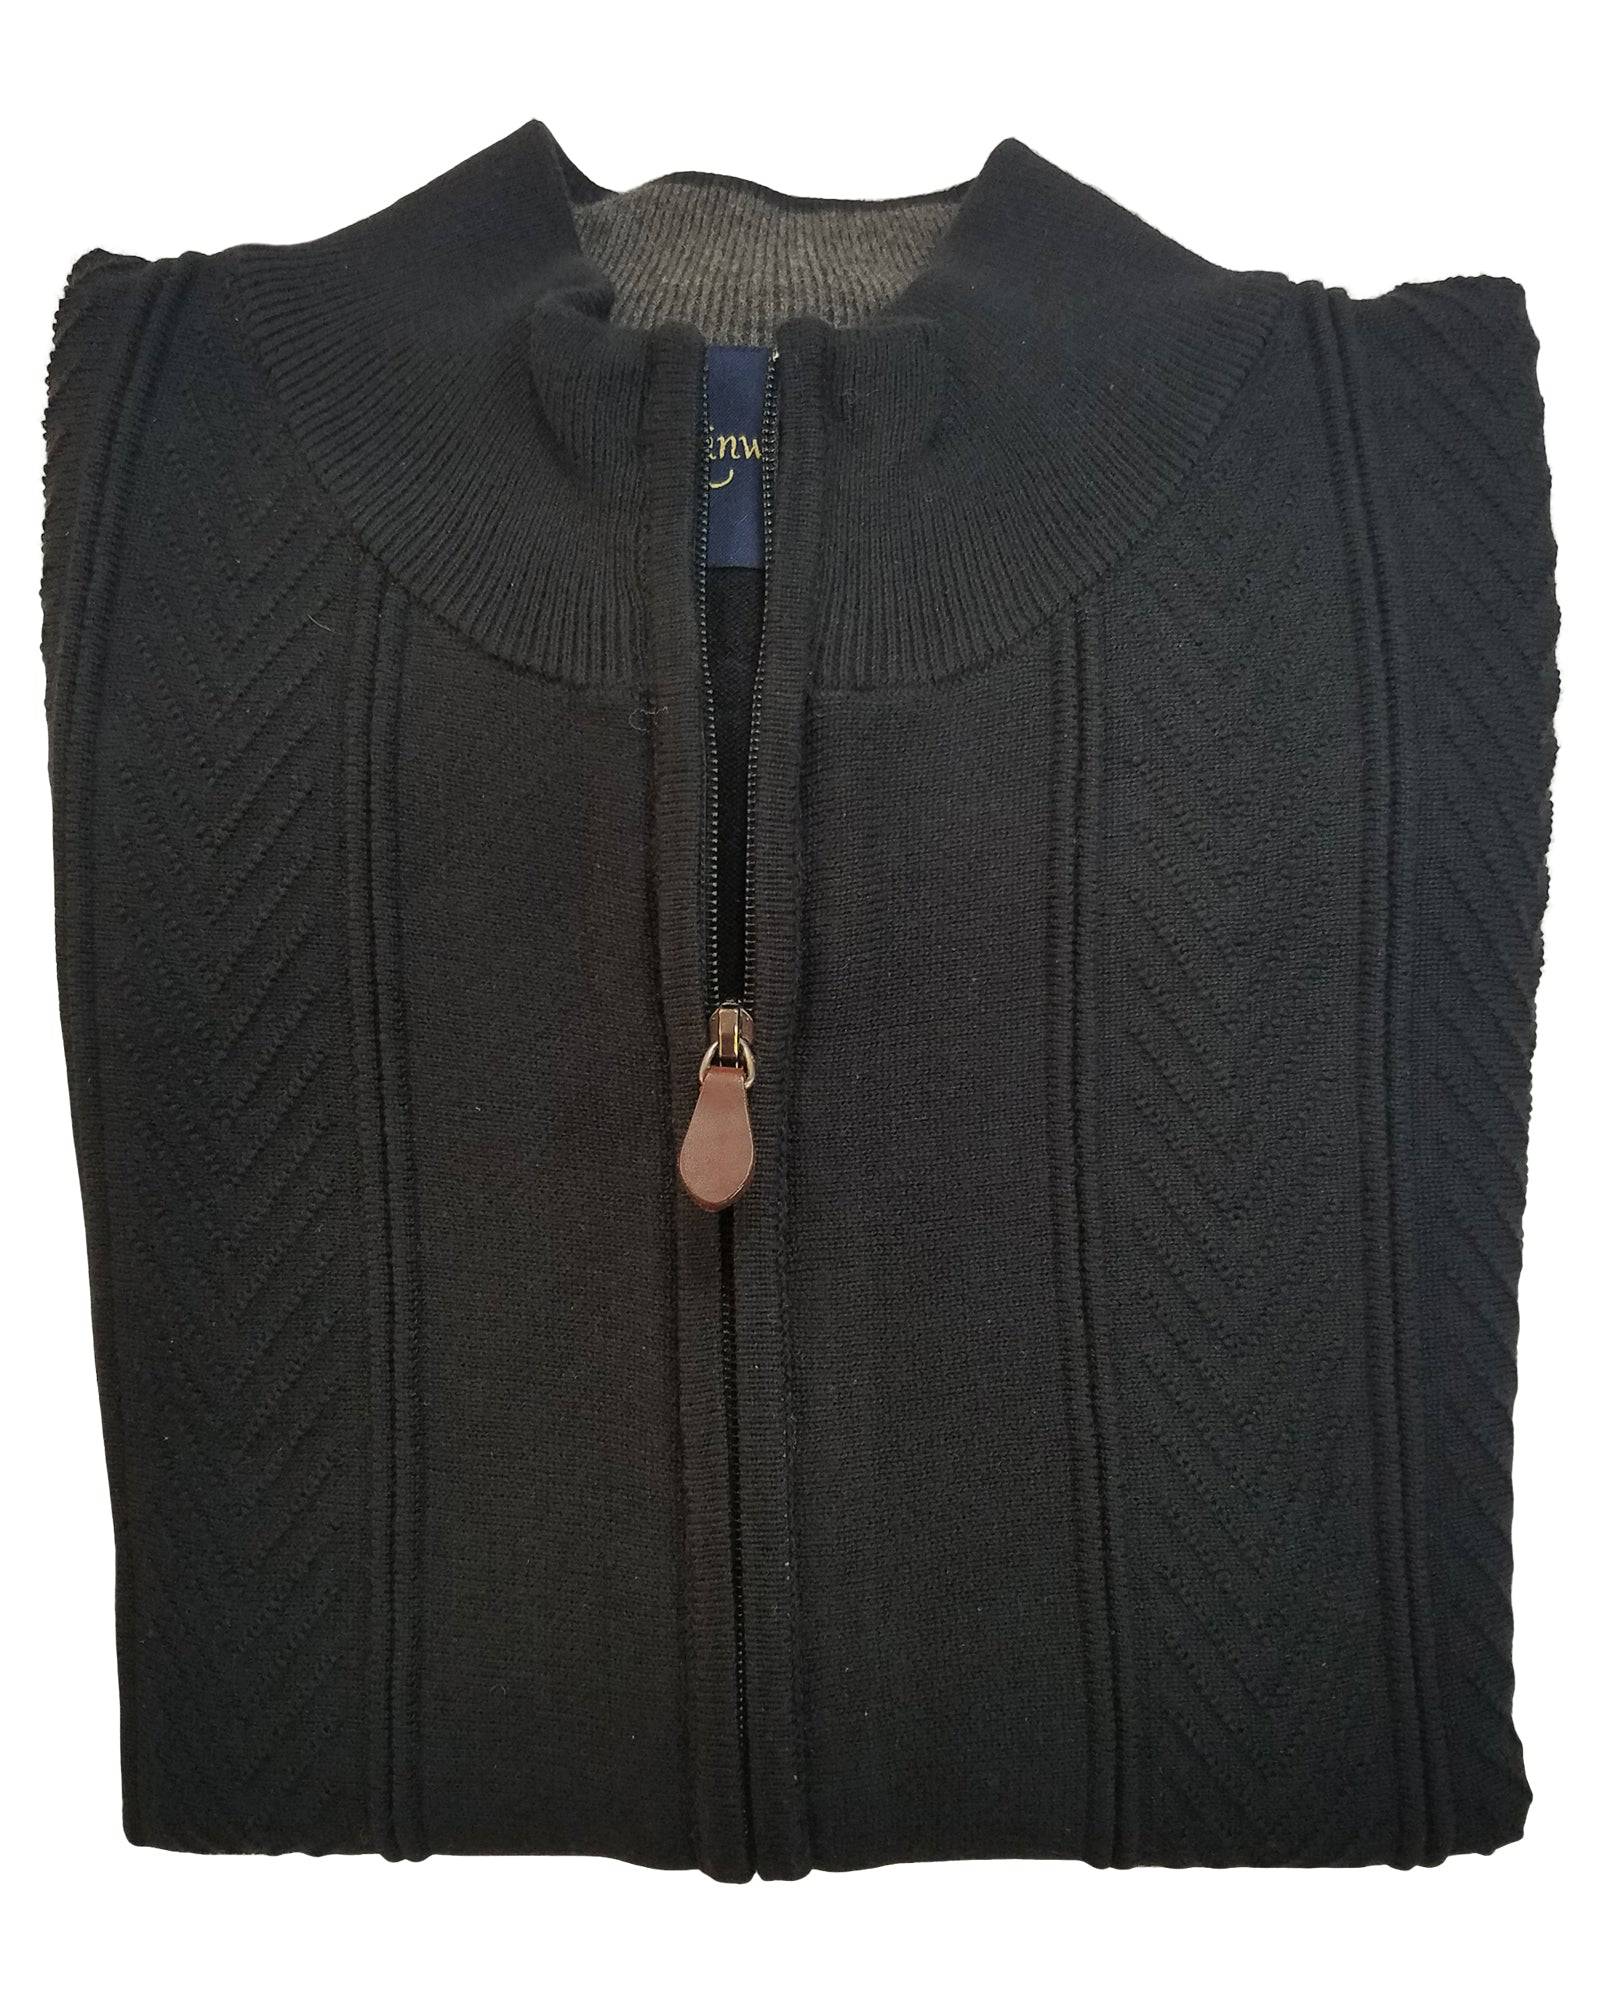 Zip Front Cardigan Sweater In Black Cotton Blend Cable Knit - Rainwater's Men's Clothing and Tuxedo Rental